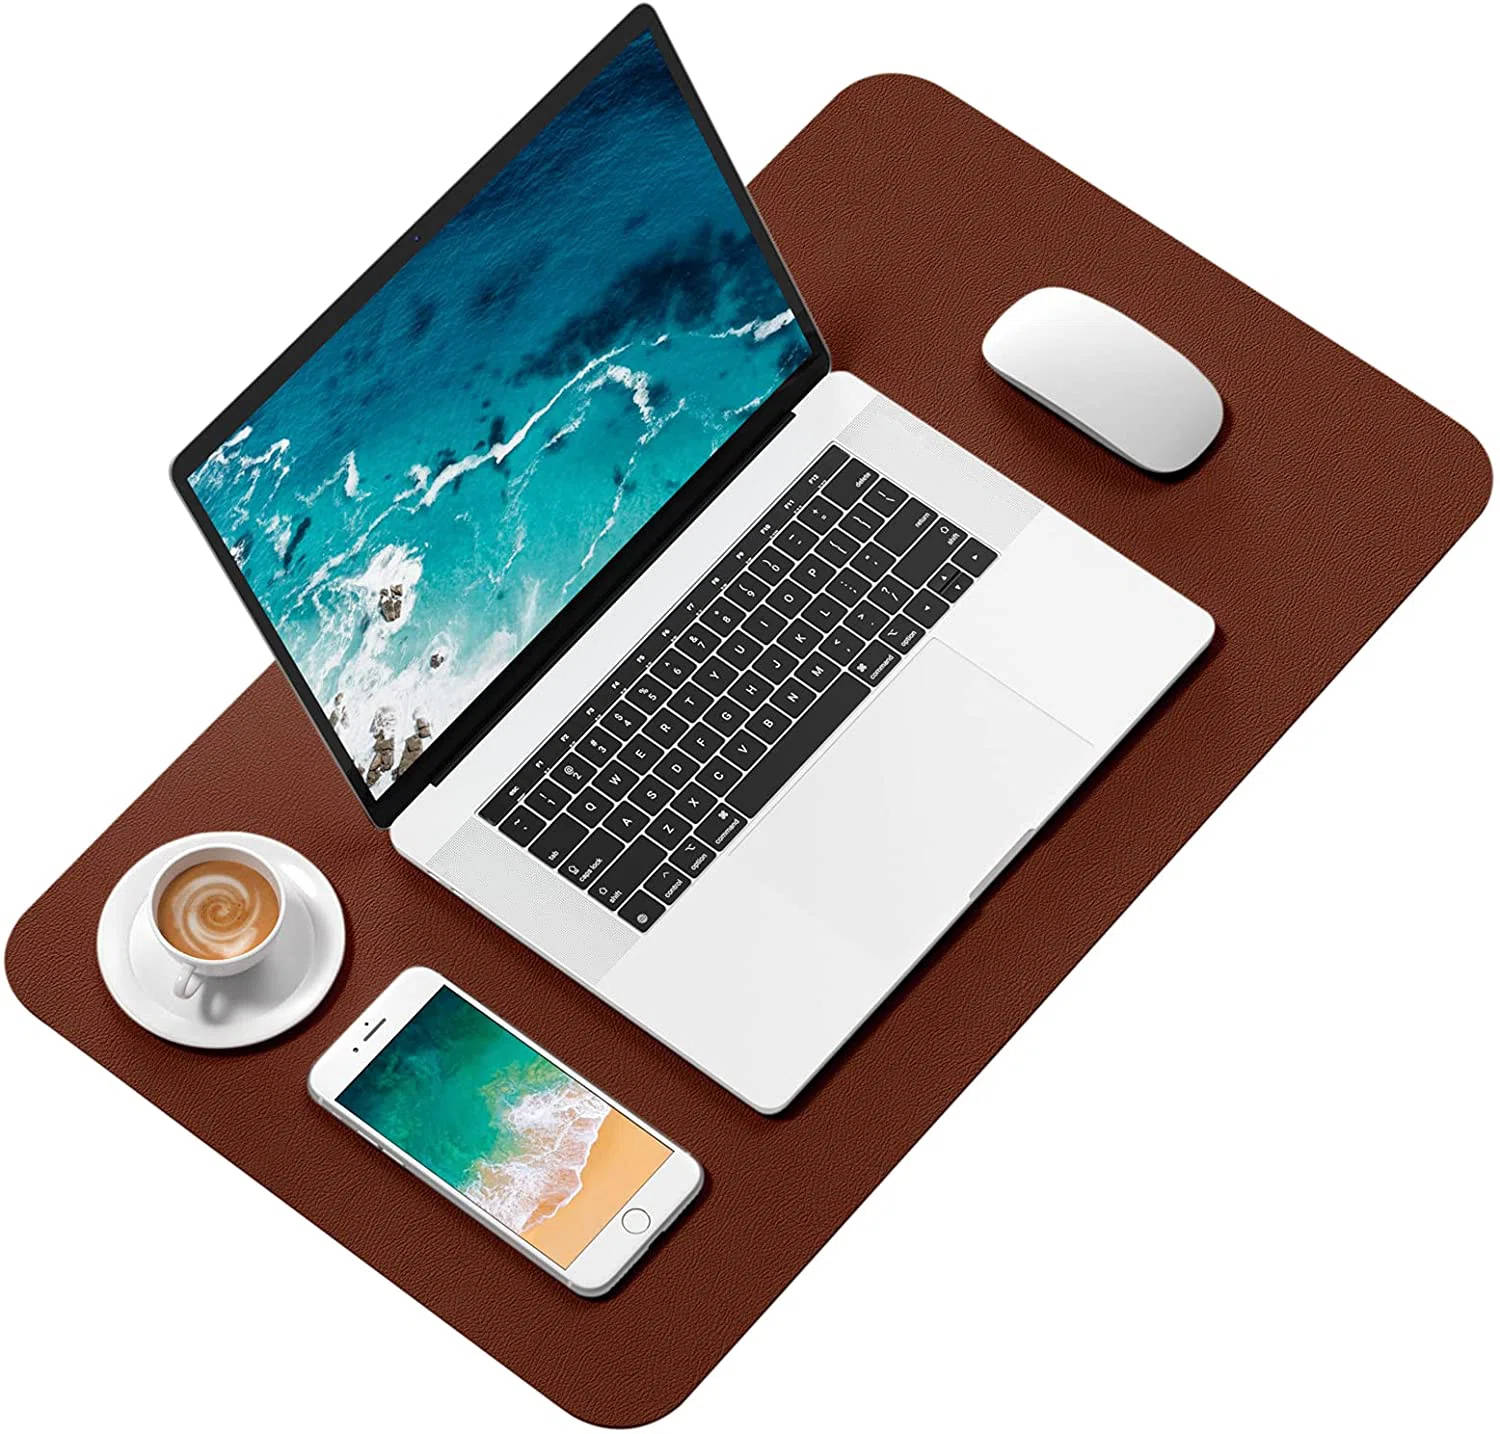 Coffee With Laptop And Accessories Background